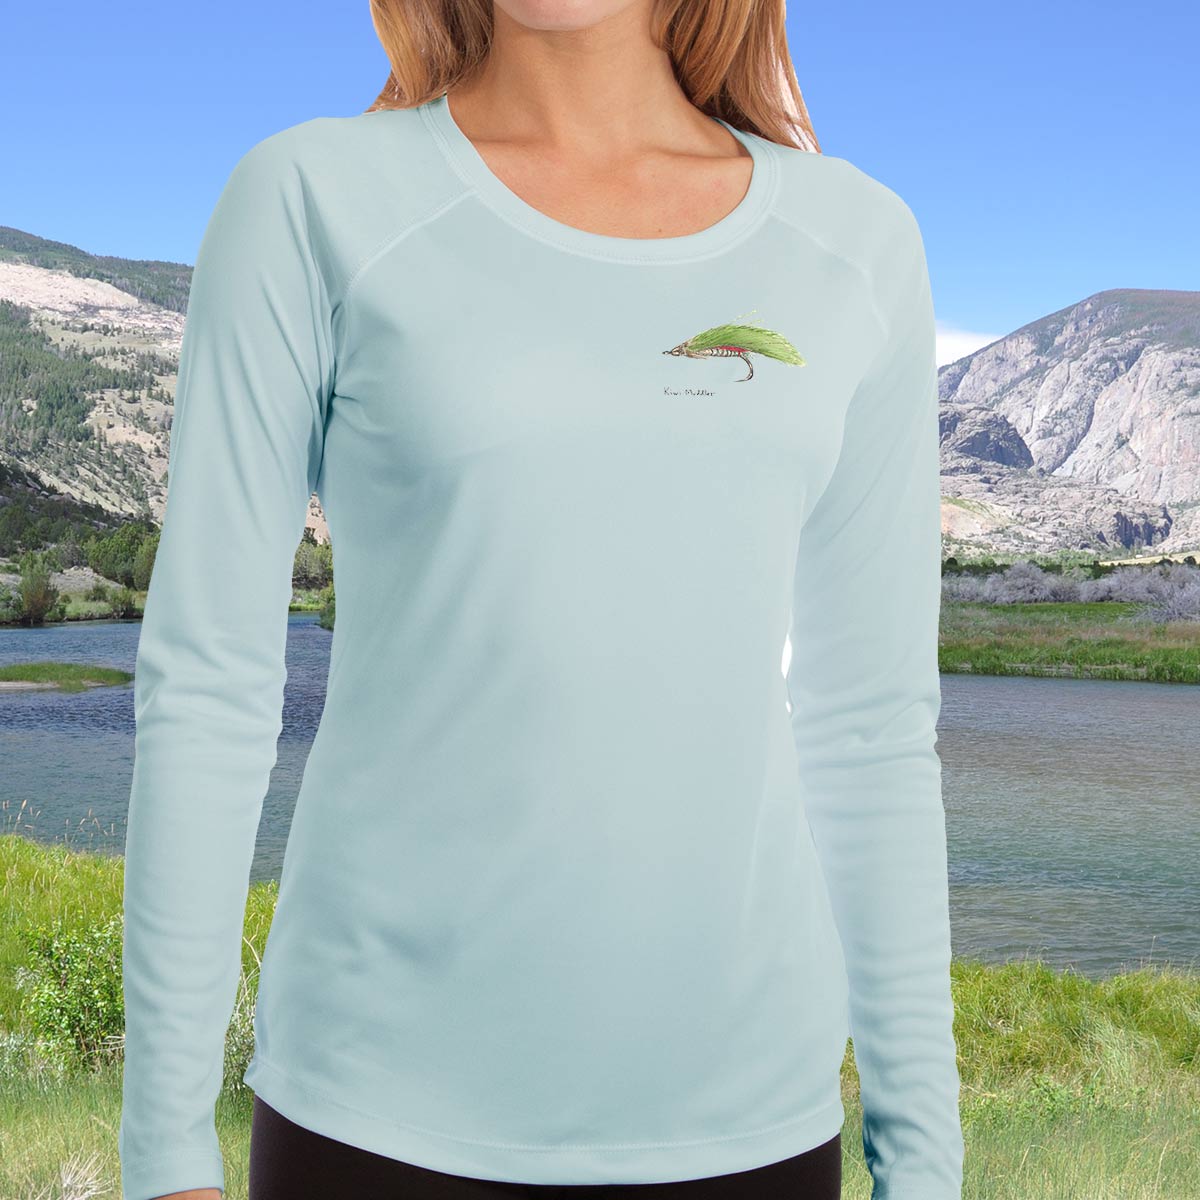 Swimming Brown Trout  Ladies Solar Long Sleeve Shirt – Jeff Currier